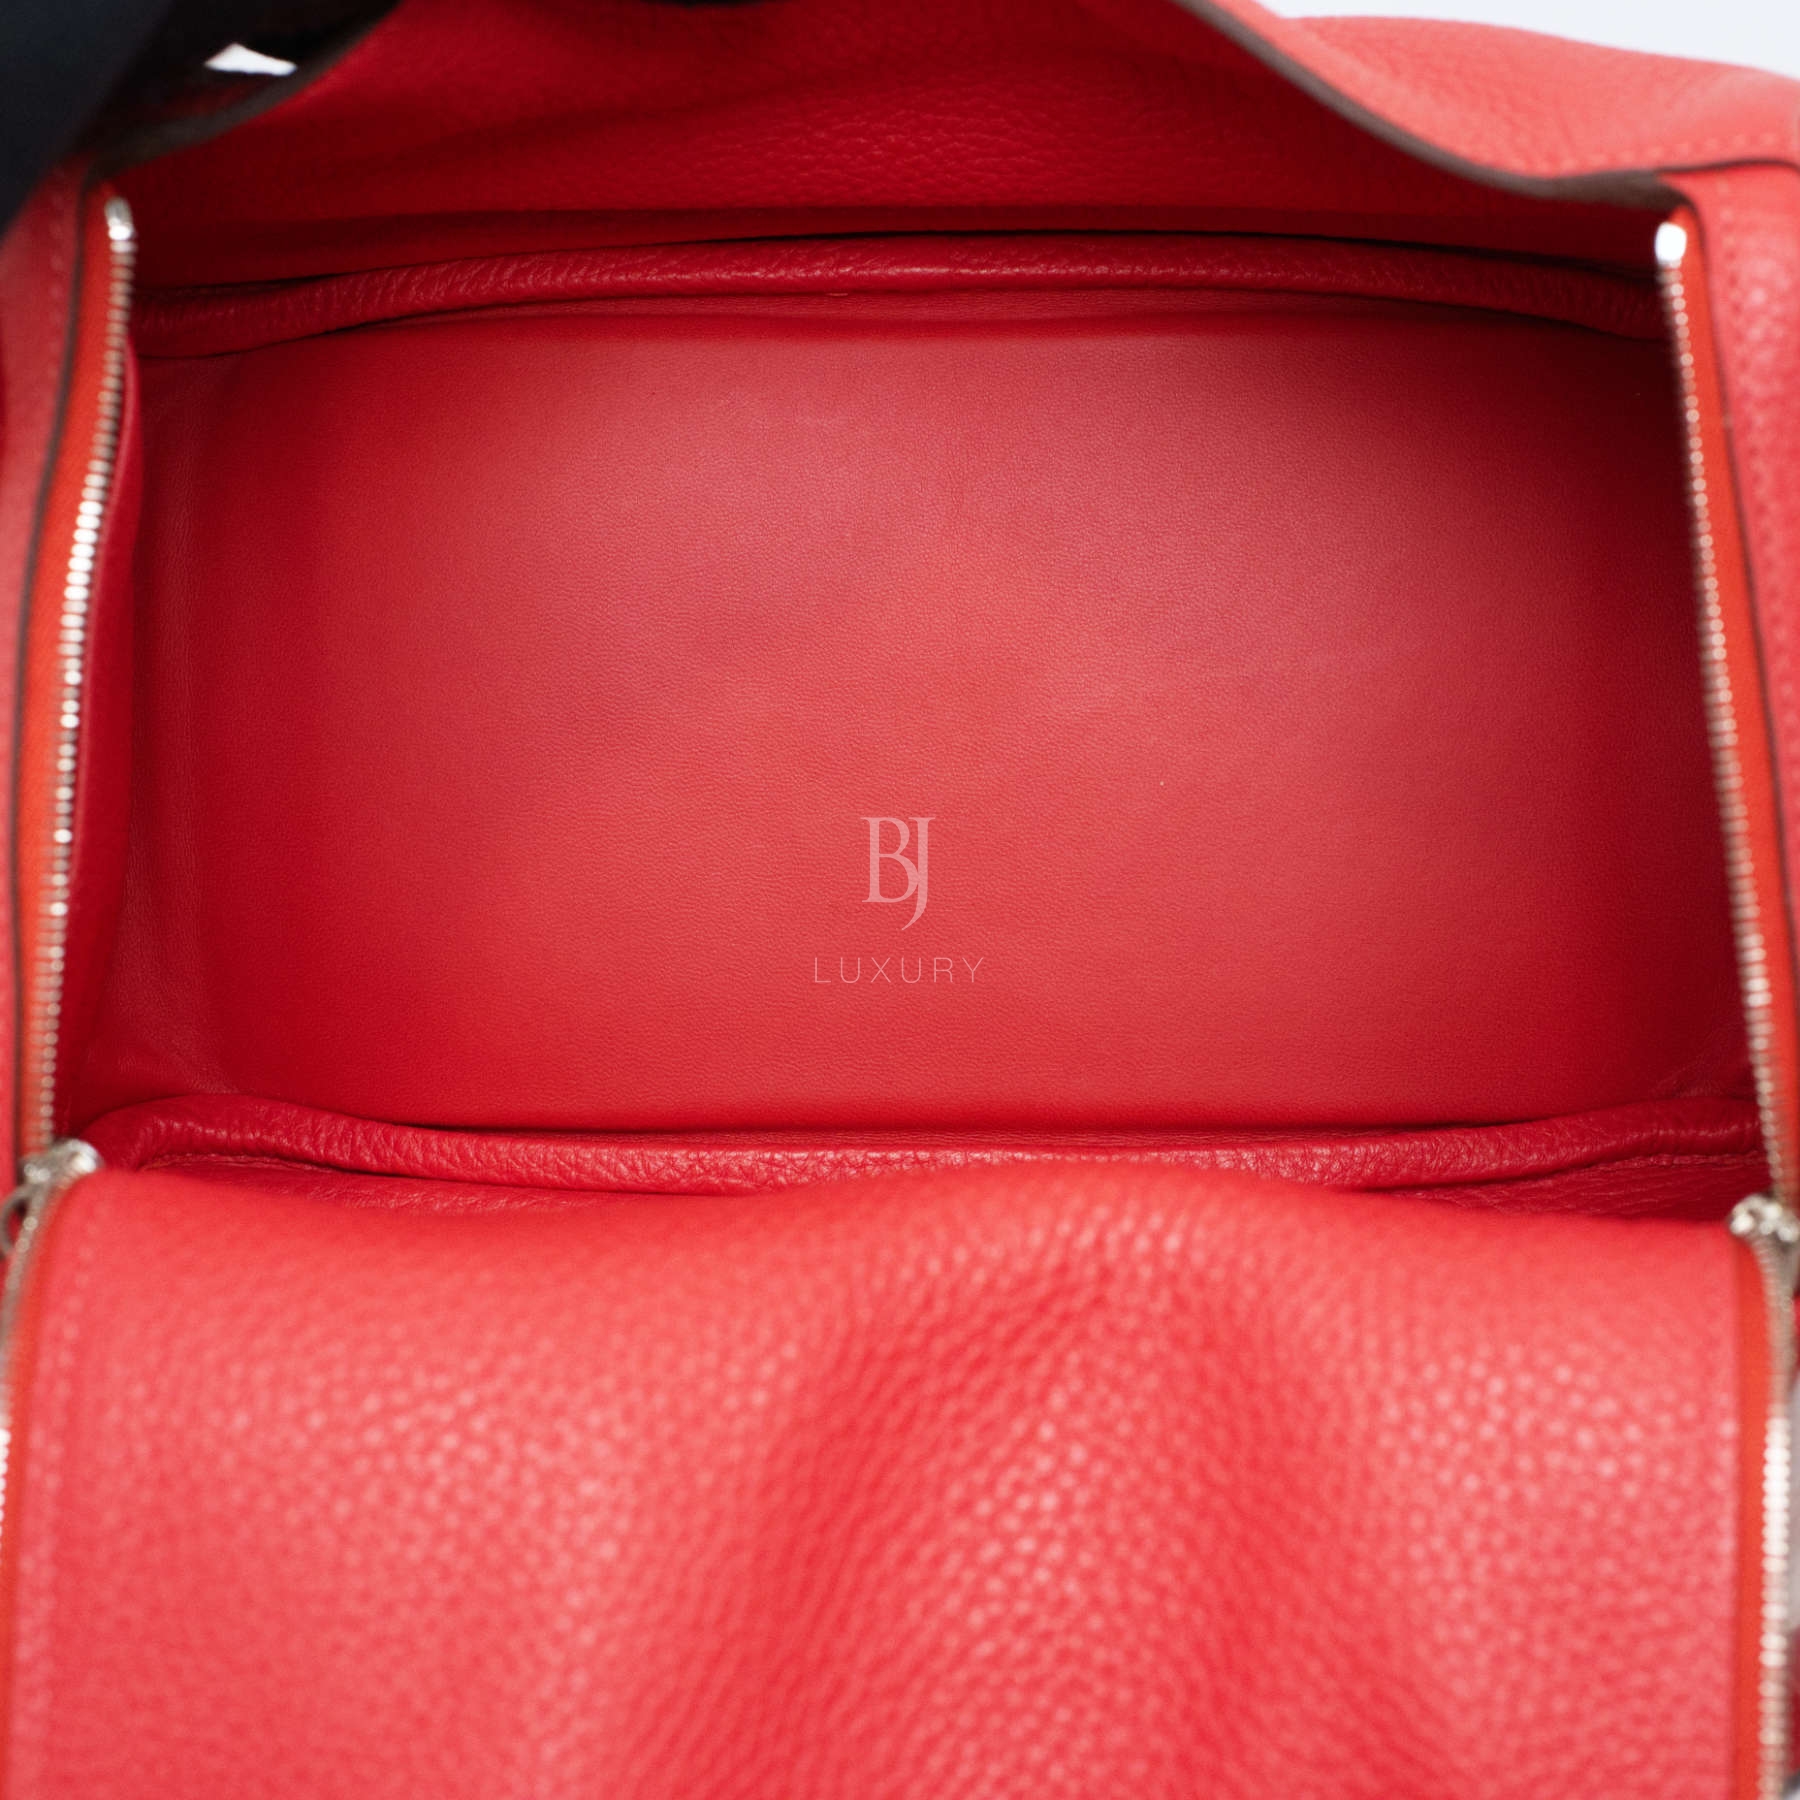 HERMES-LINDY-26-ROUGETOMATE-CLEMENCE-4812 interior.jpg